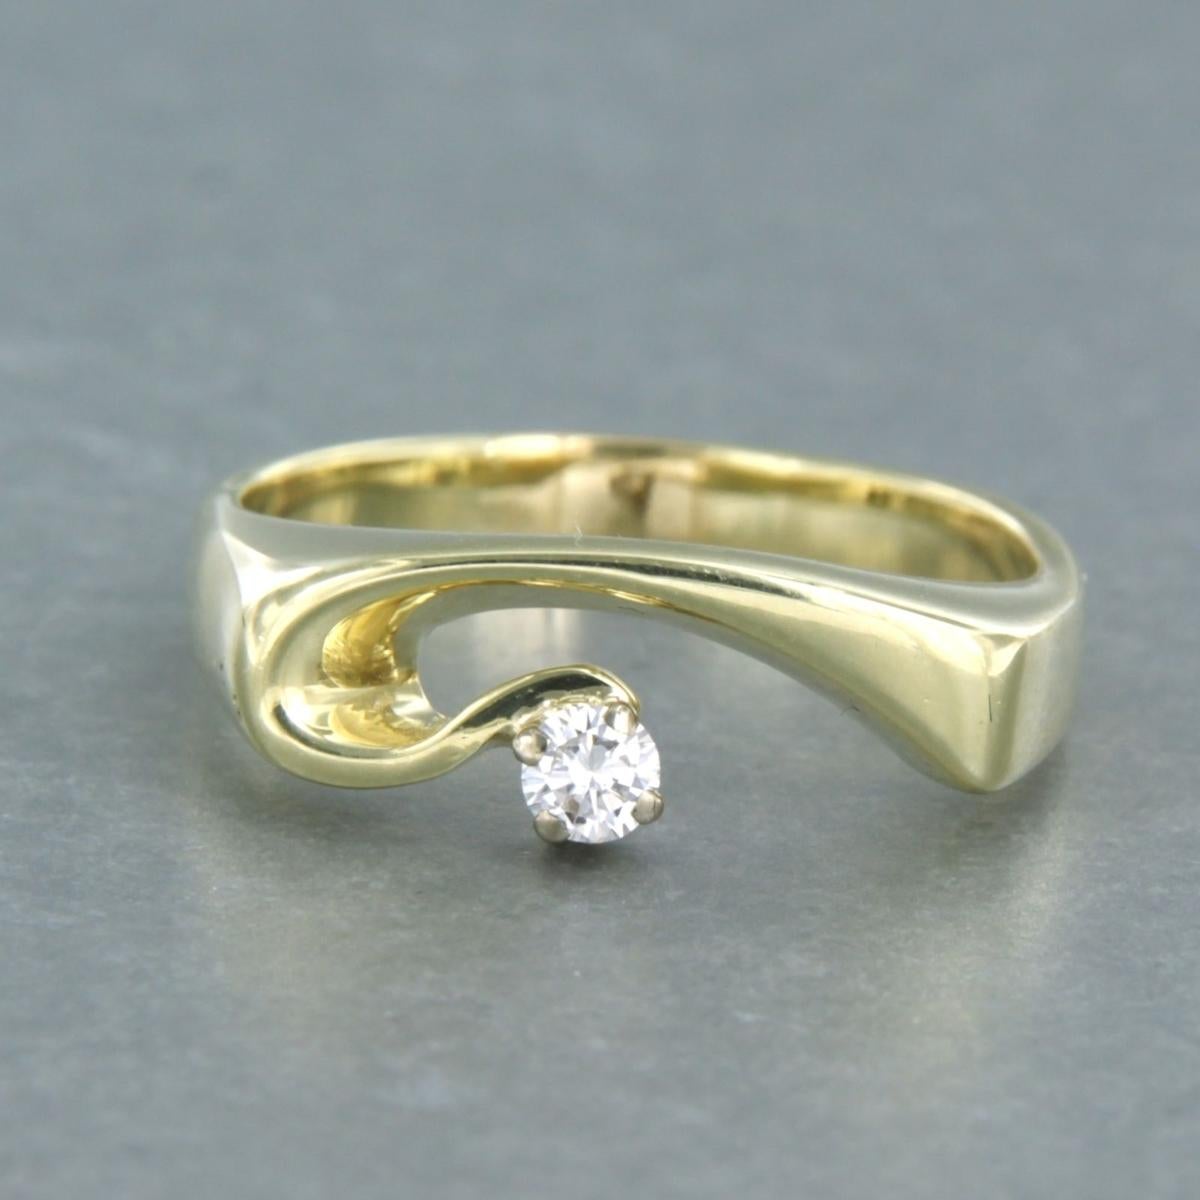 14k Yellow Gold Ring Set with One Brilliant Cut Diamond 0.12 Carat For Sale 1